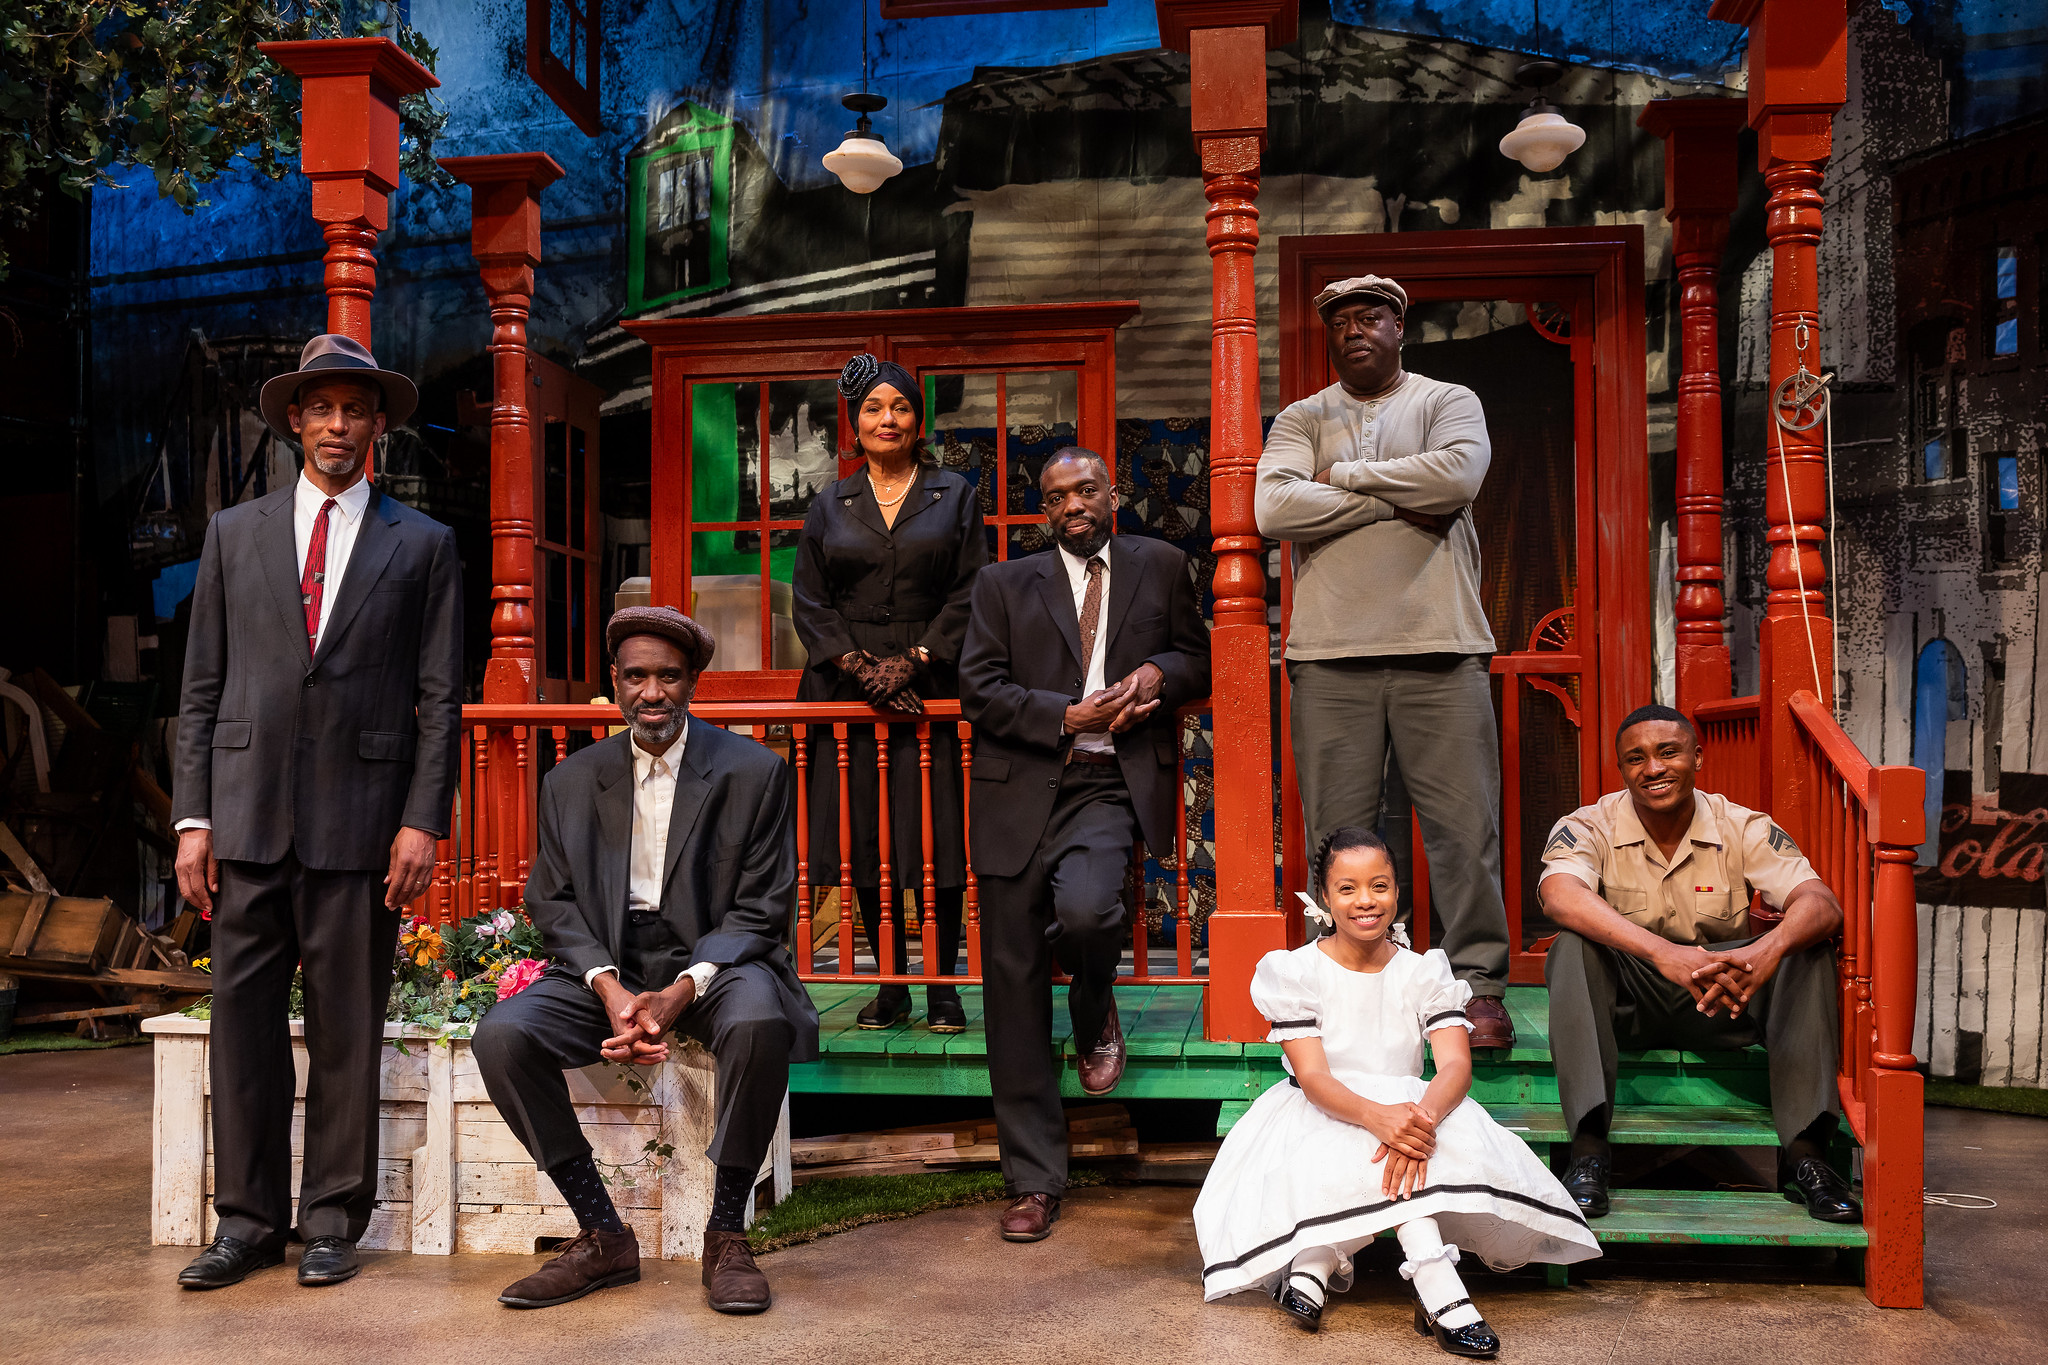 August Wilson’s Fences Takes the Top Spot at the Berkshire Theatre Critic Awards